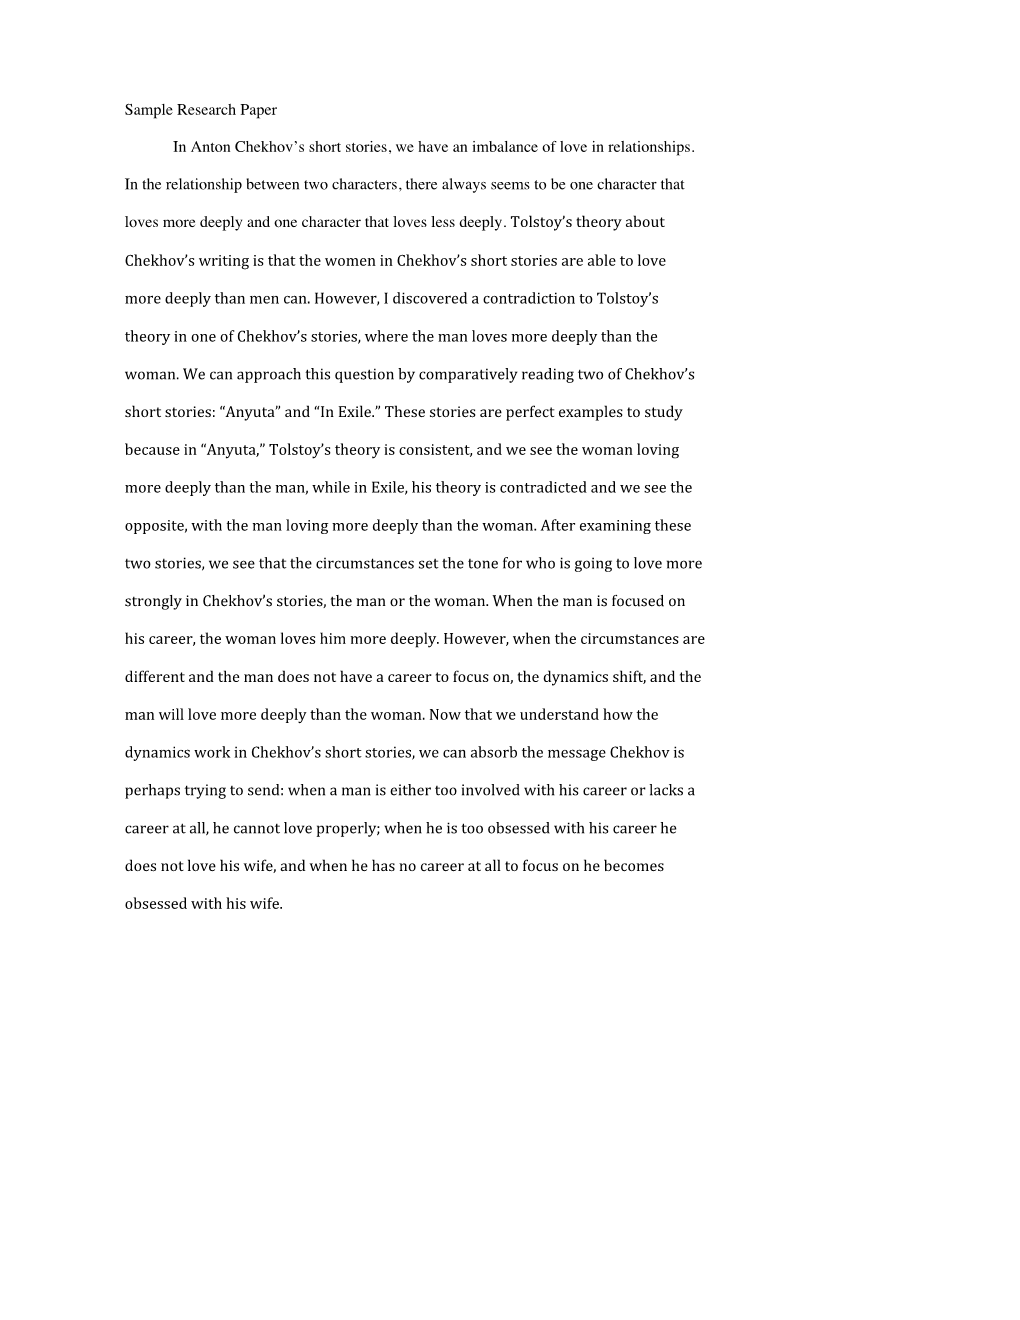 Sample Research Paper in Anton Chekhov's Short Stories, We Have An